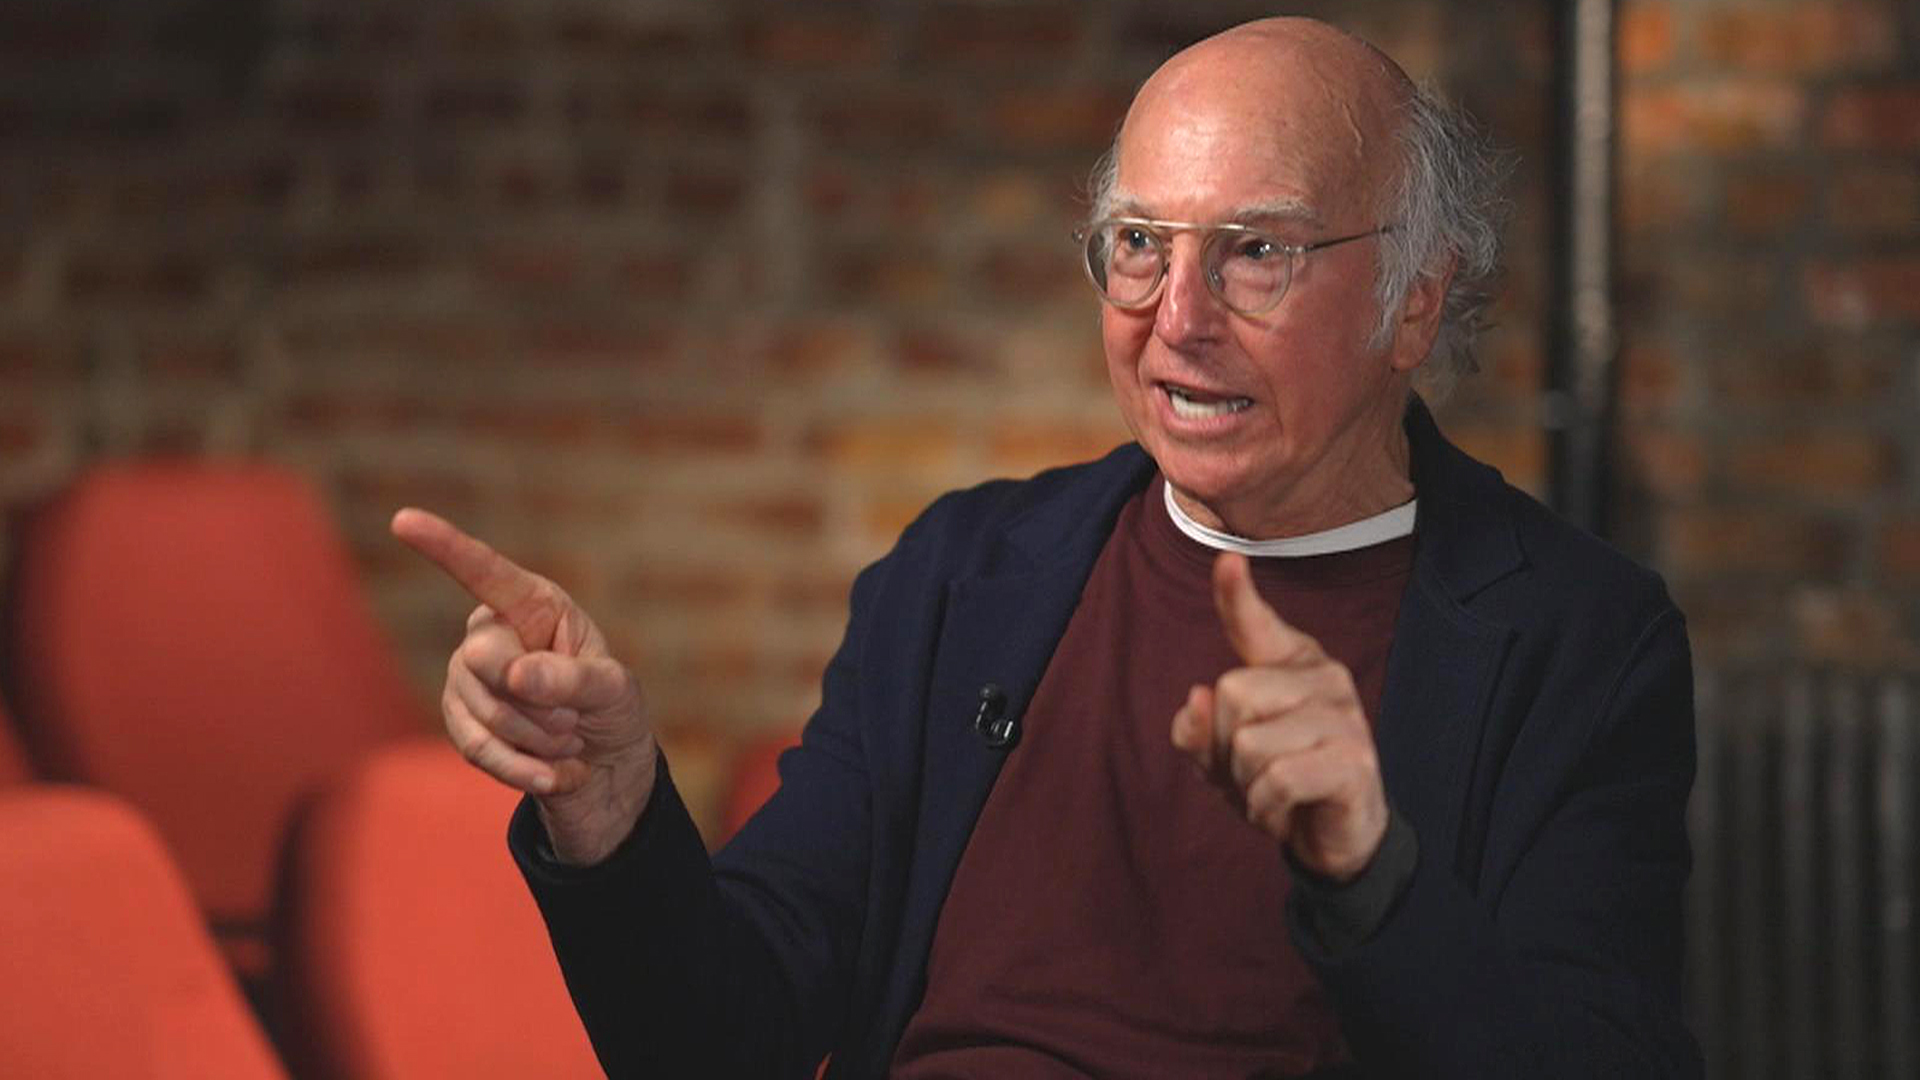 Larry David takes credit for this coffee cup invention